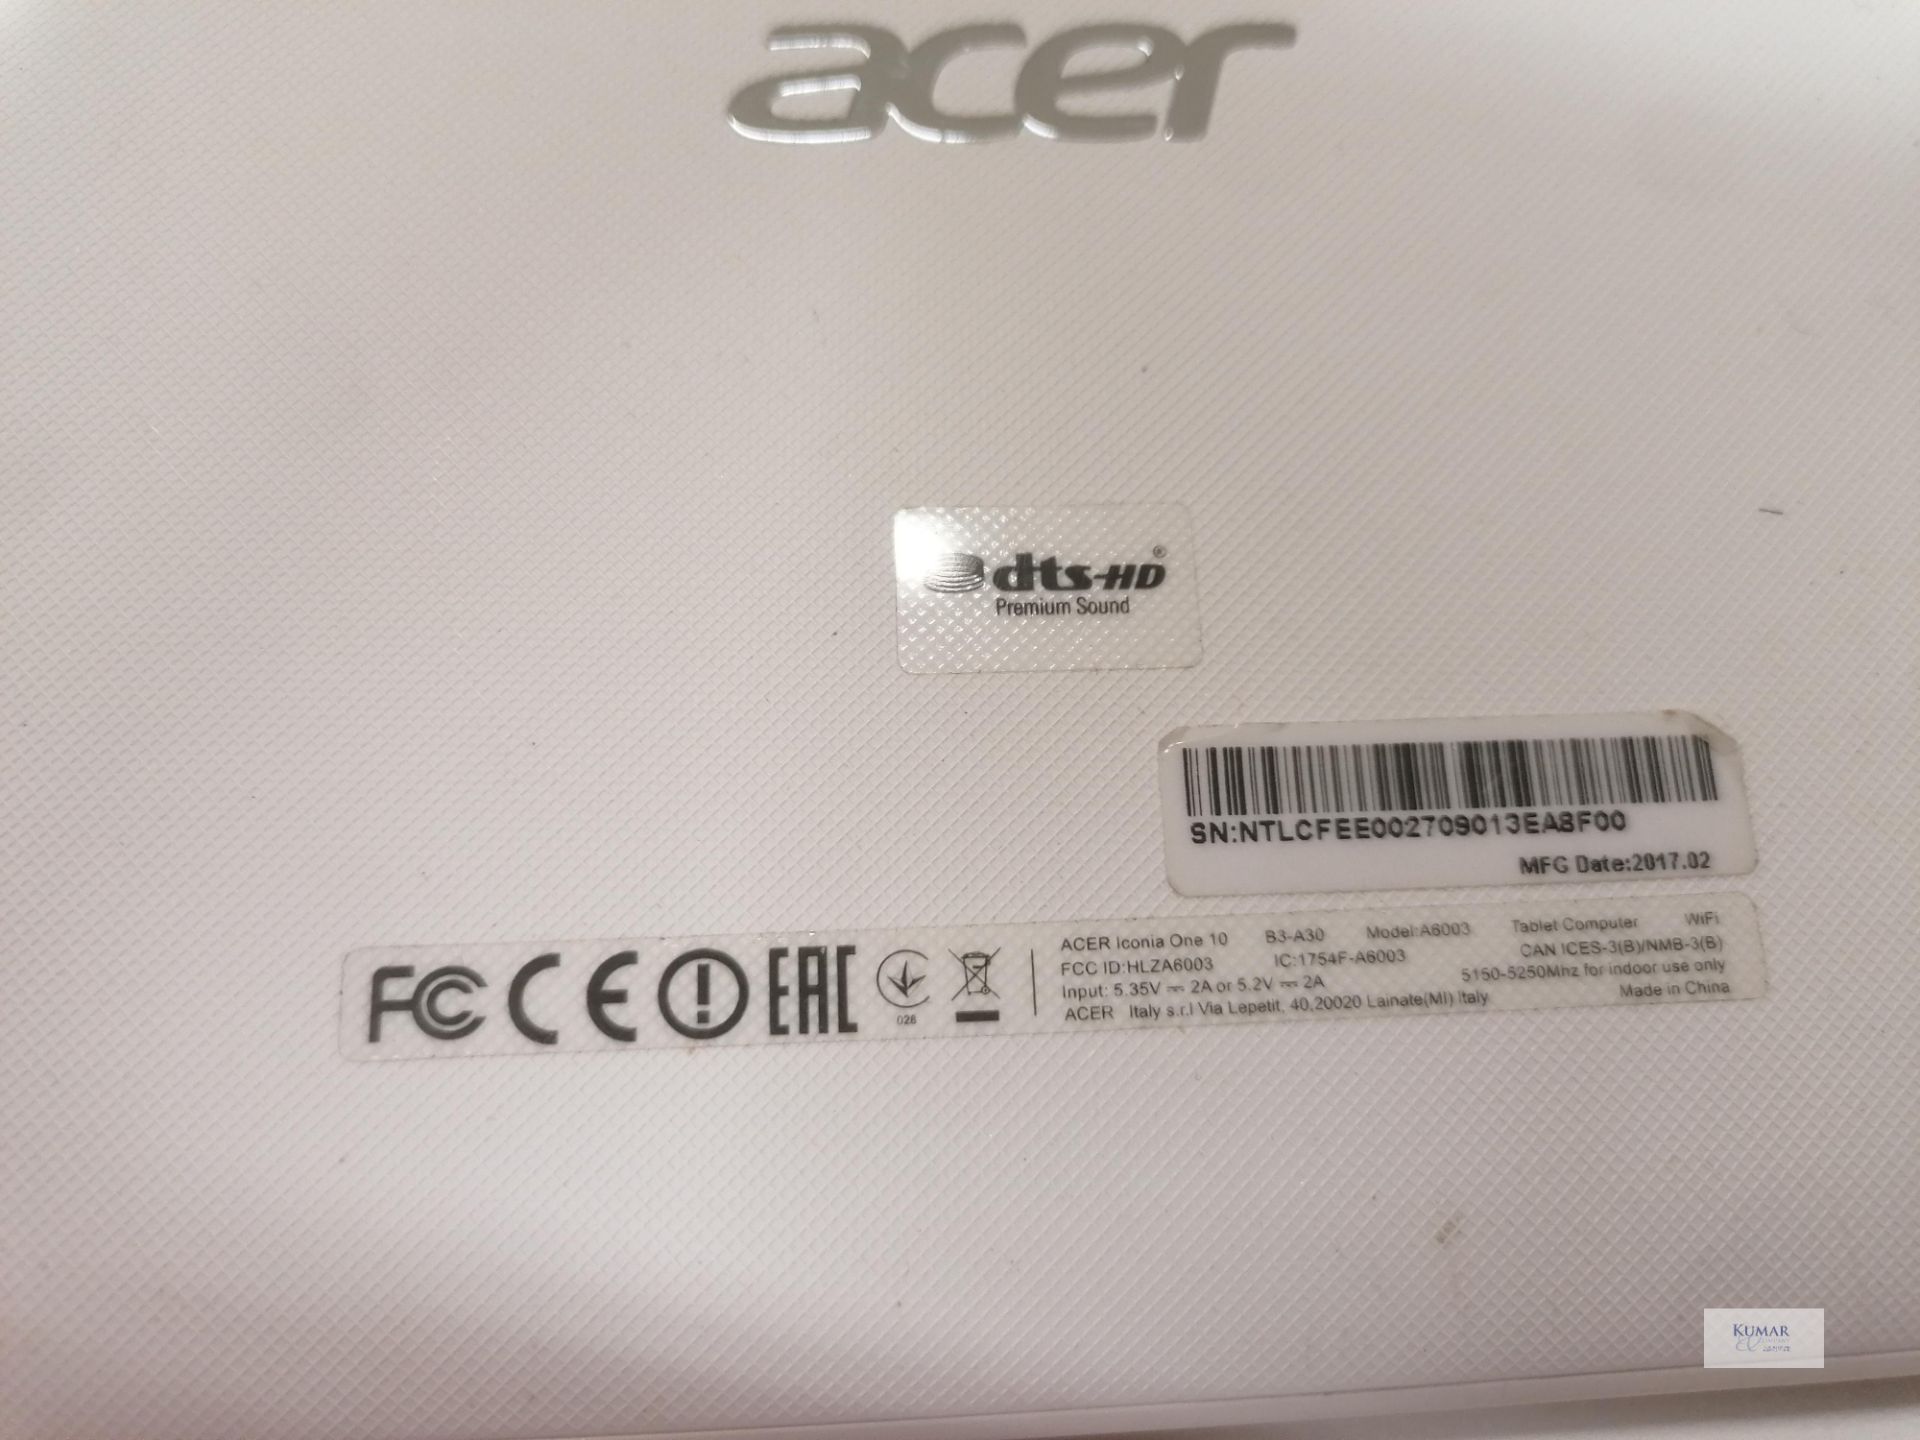 Acer Iconia One 10 B3-A30 Model A5003 Tablet Man 02 2017 Updated 05 02 2019 - Image 5 of 5